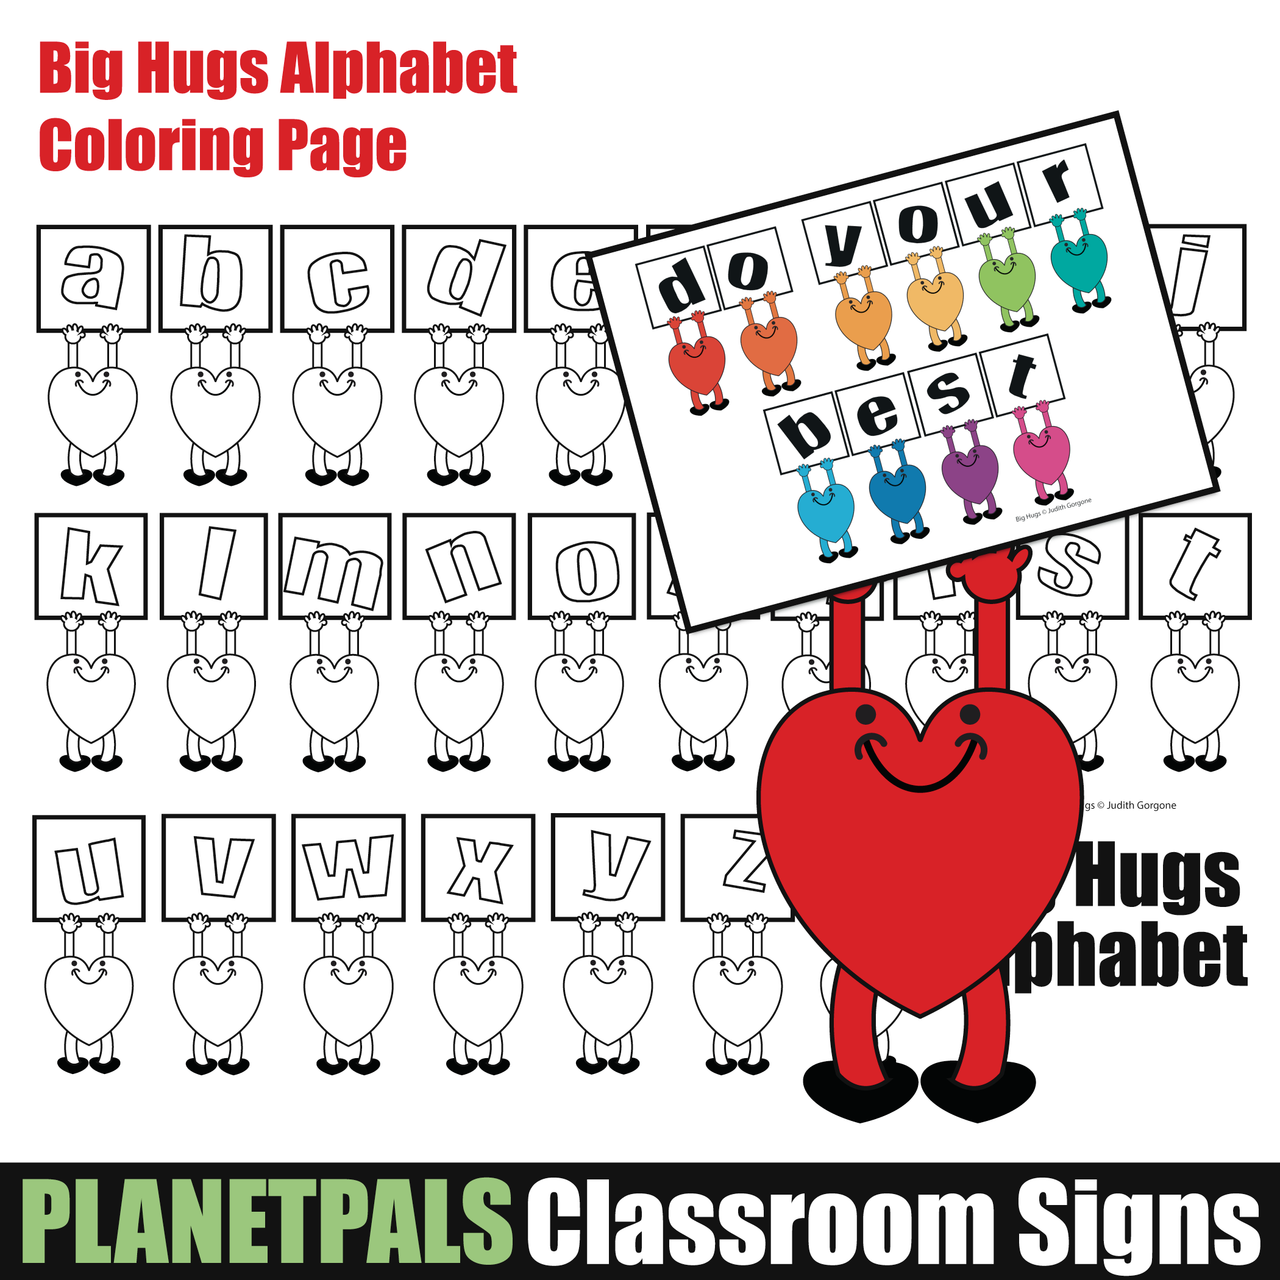 Big hugs alphabet coloring page make your own sign learn letters